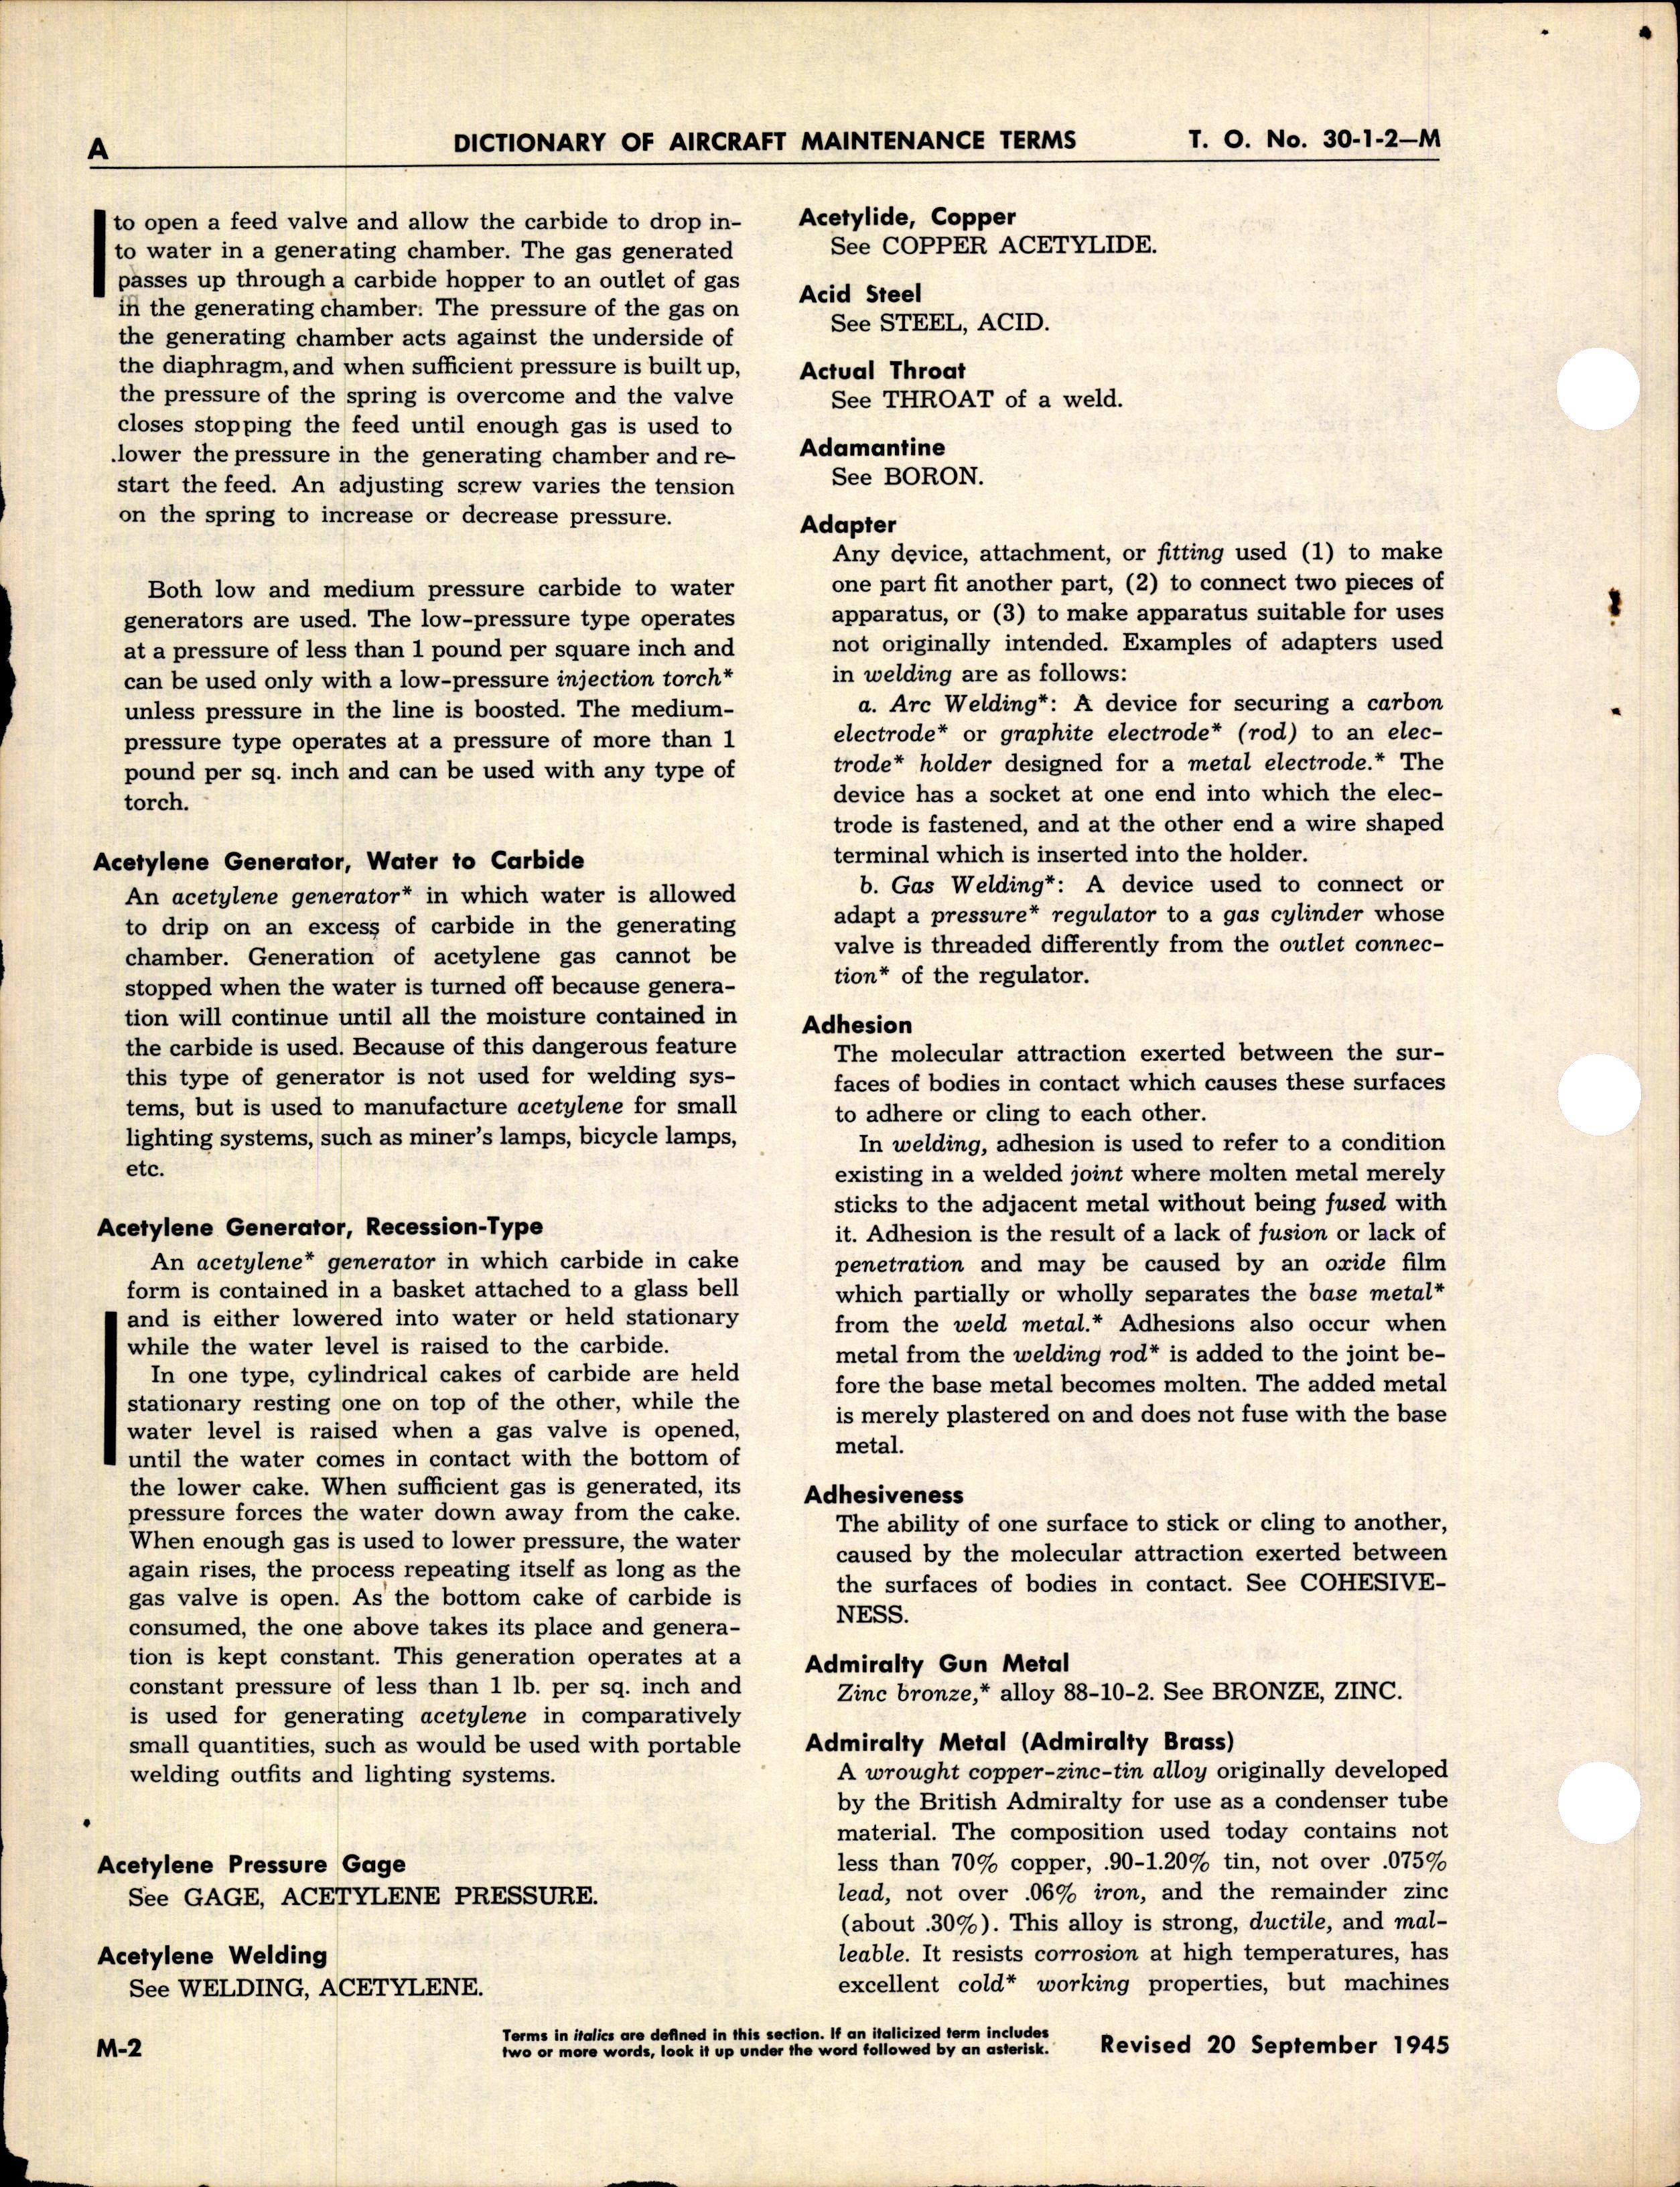 Sample page 8 from AirCorps Library document: Dictionary of Aircraft Maintenance Terms (Section M - Welding, Forging, and Casting Section)